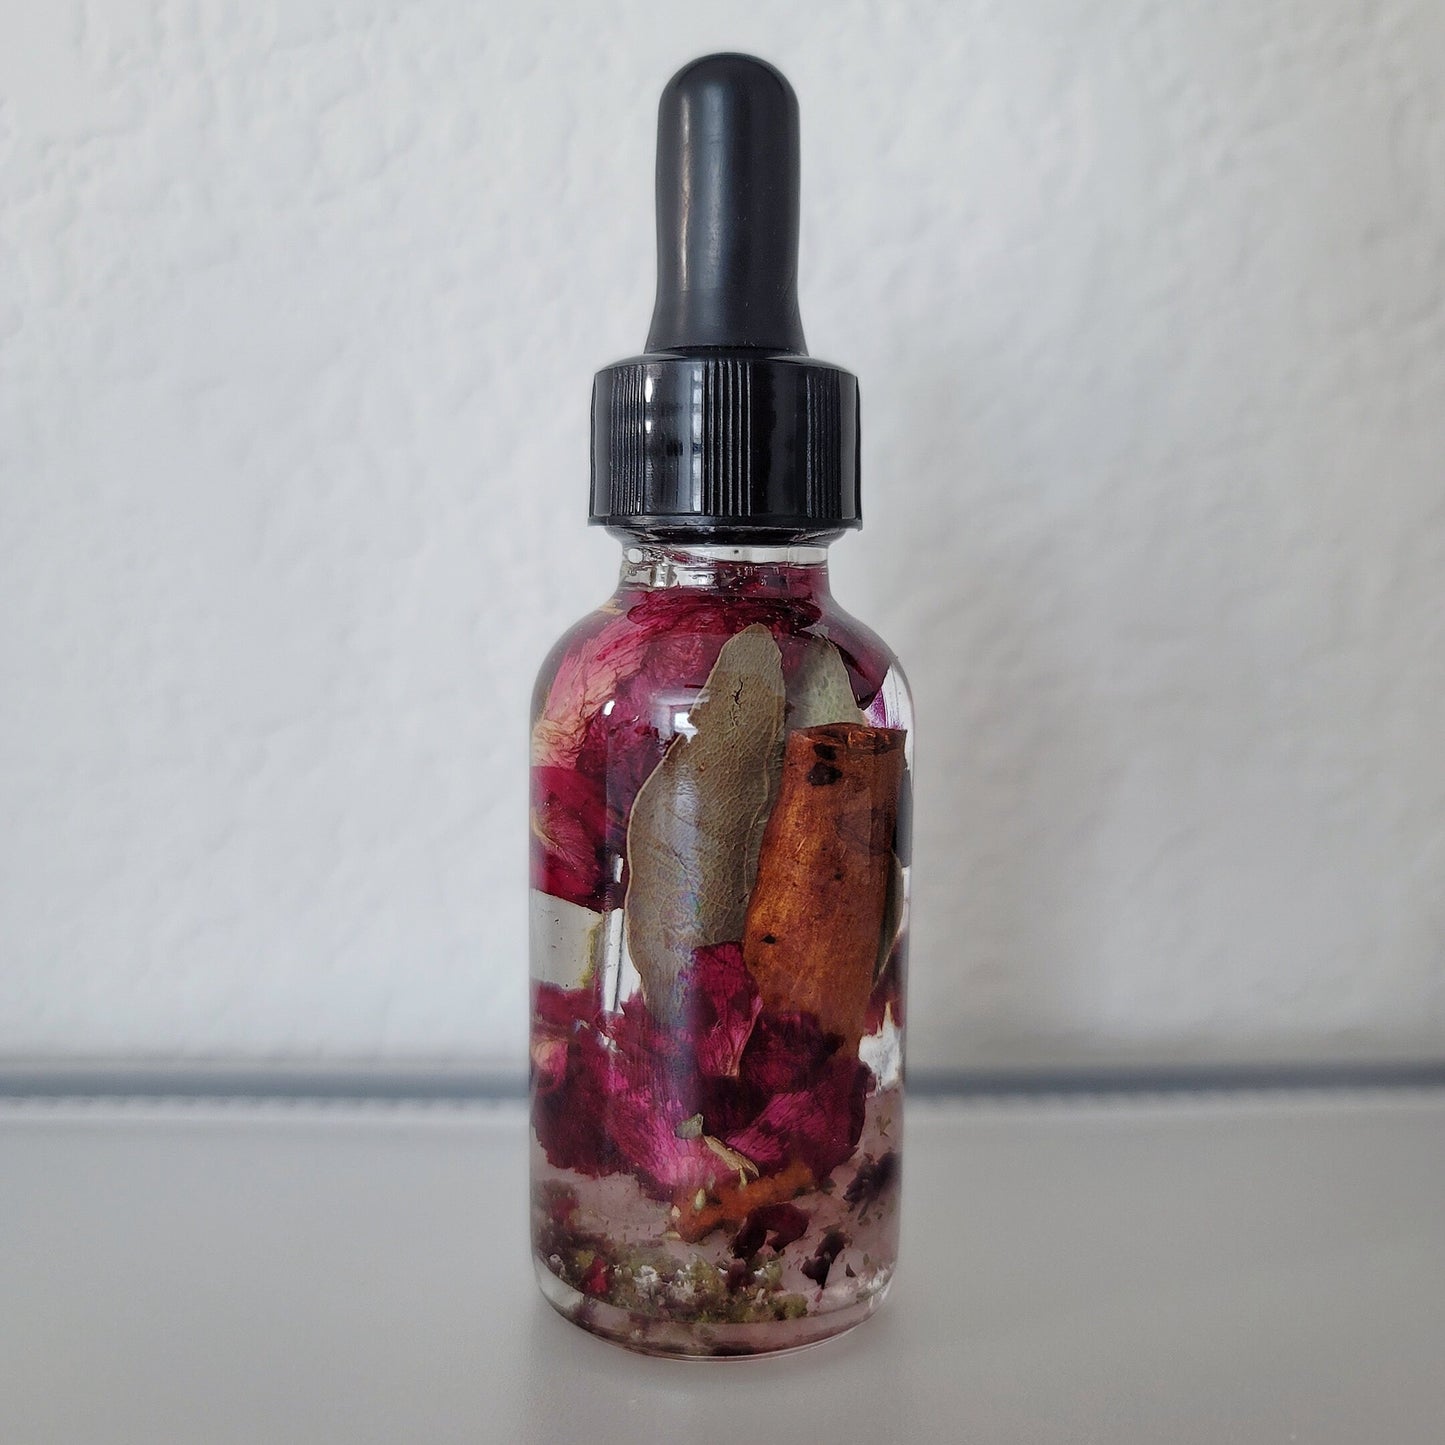 Aphrodite Goddess Oil | Ritual & Spell Work, Altars, Invocation, Manifestation, and Intentions